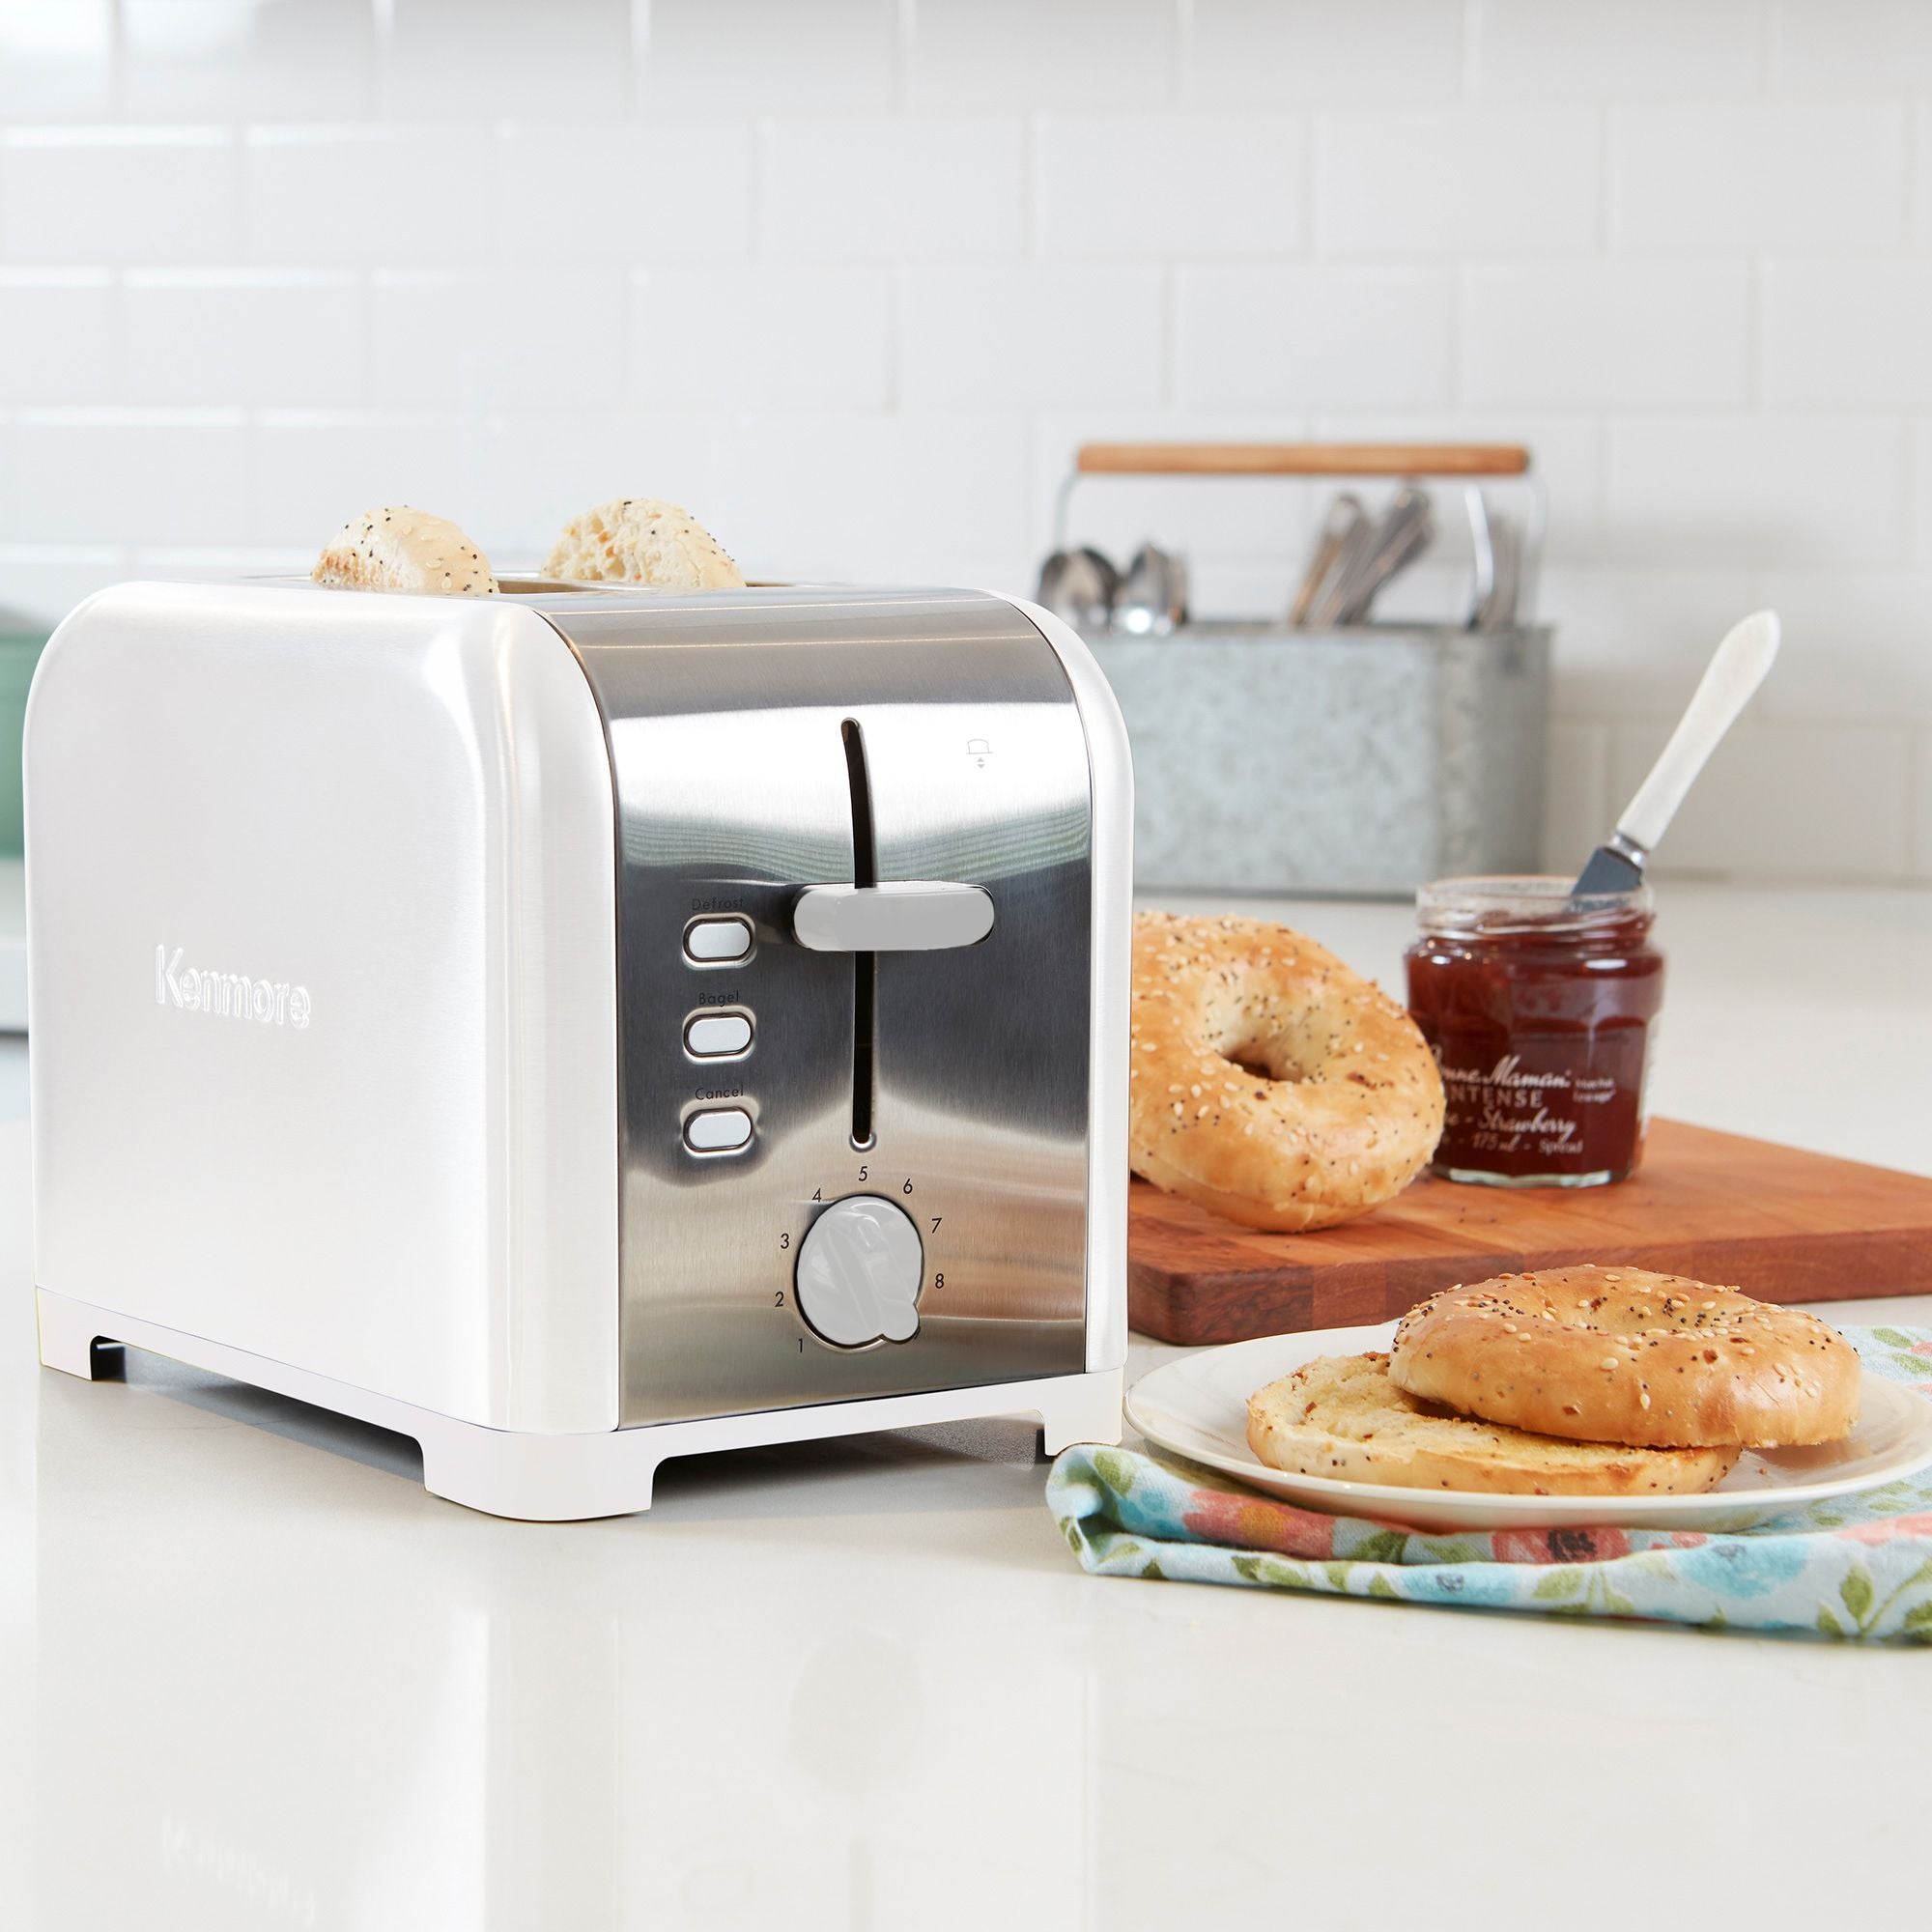 Kenmore 2-slice stainless steel toaster with toasted bagel slices inside on a light gray countertop with white tile backsplash behind. To the right of the toaster is a napkin and plate with toasted bagel and a wooden cutting board with uncut bagels and an open jam jar.